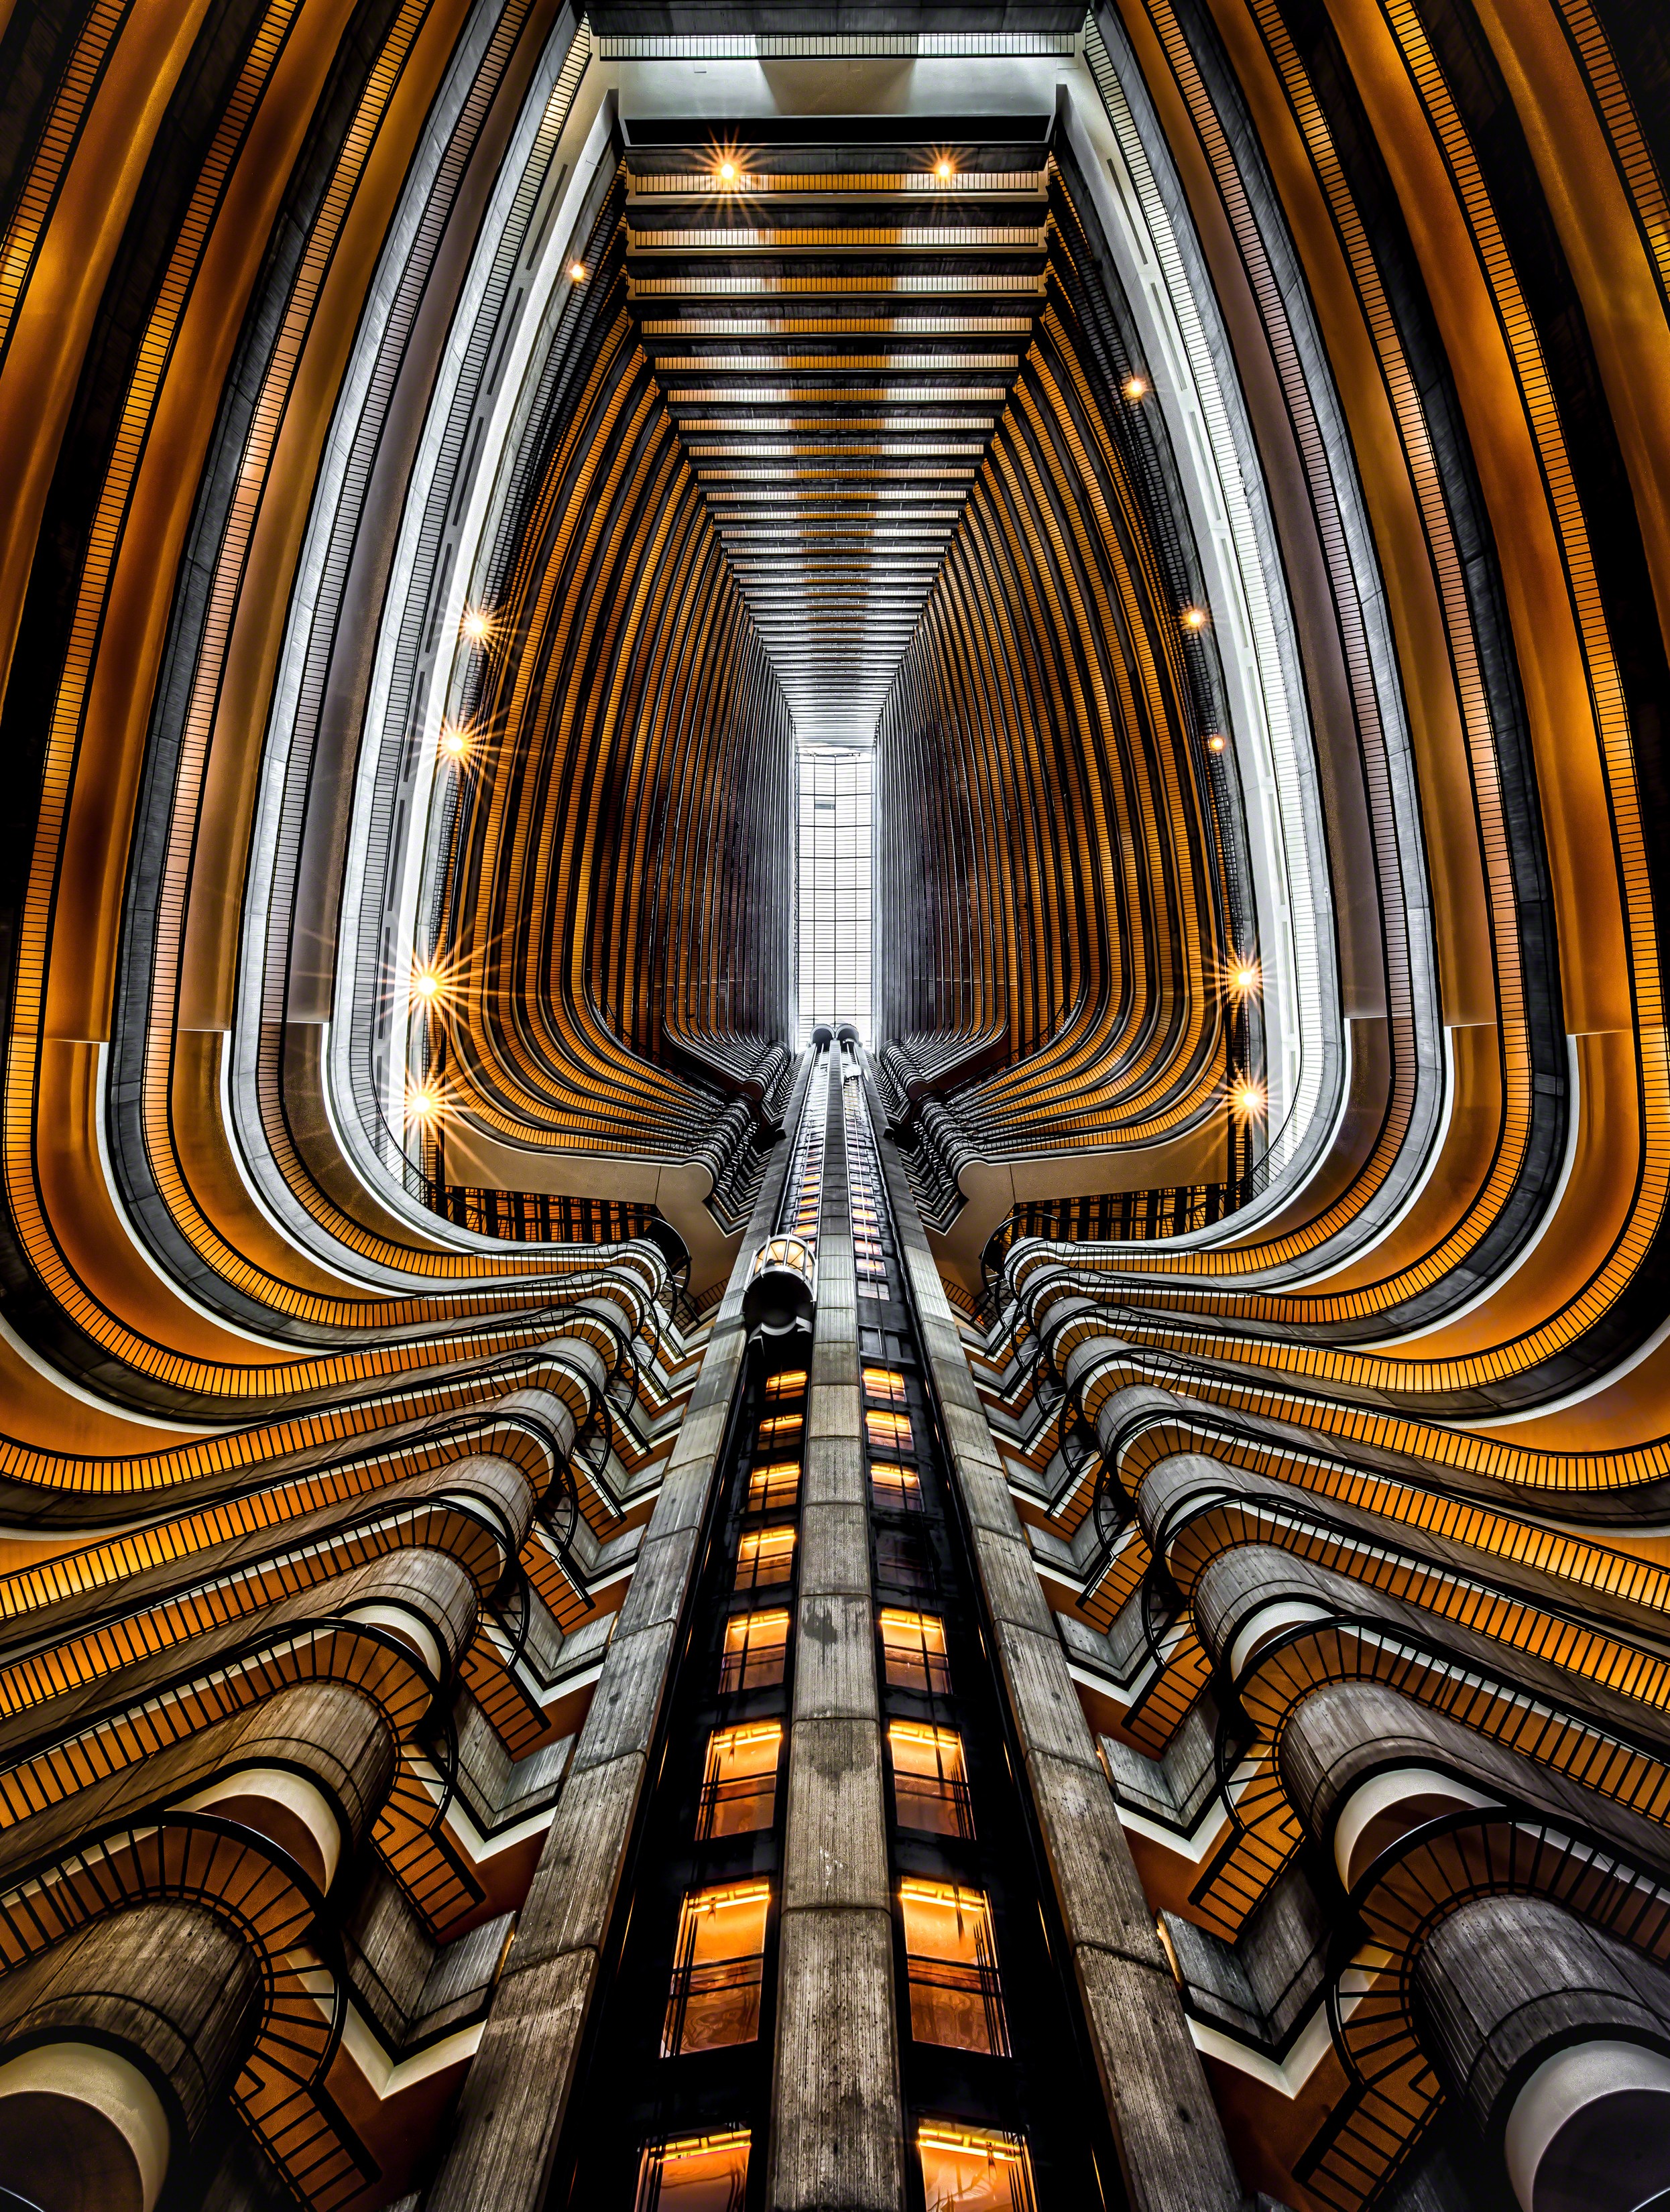 The Atlanta Marriott Marquis, which was designed by the architectural firm, John Portman & Associates.